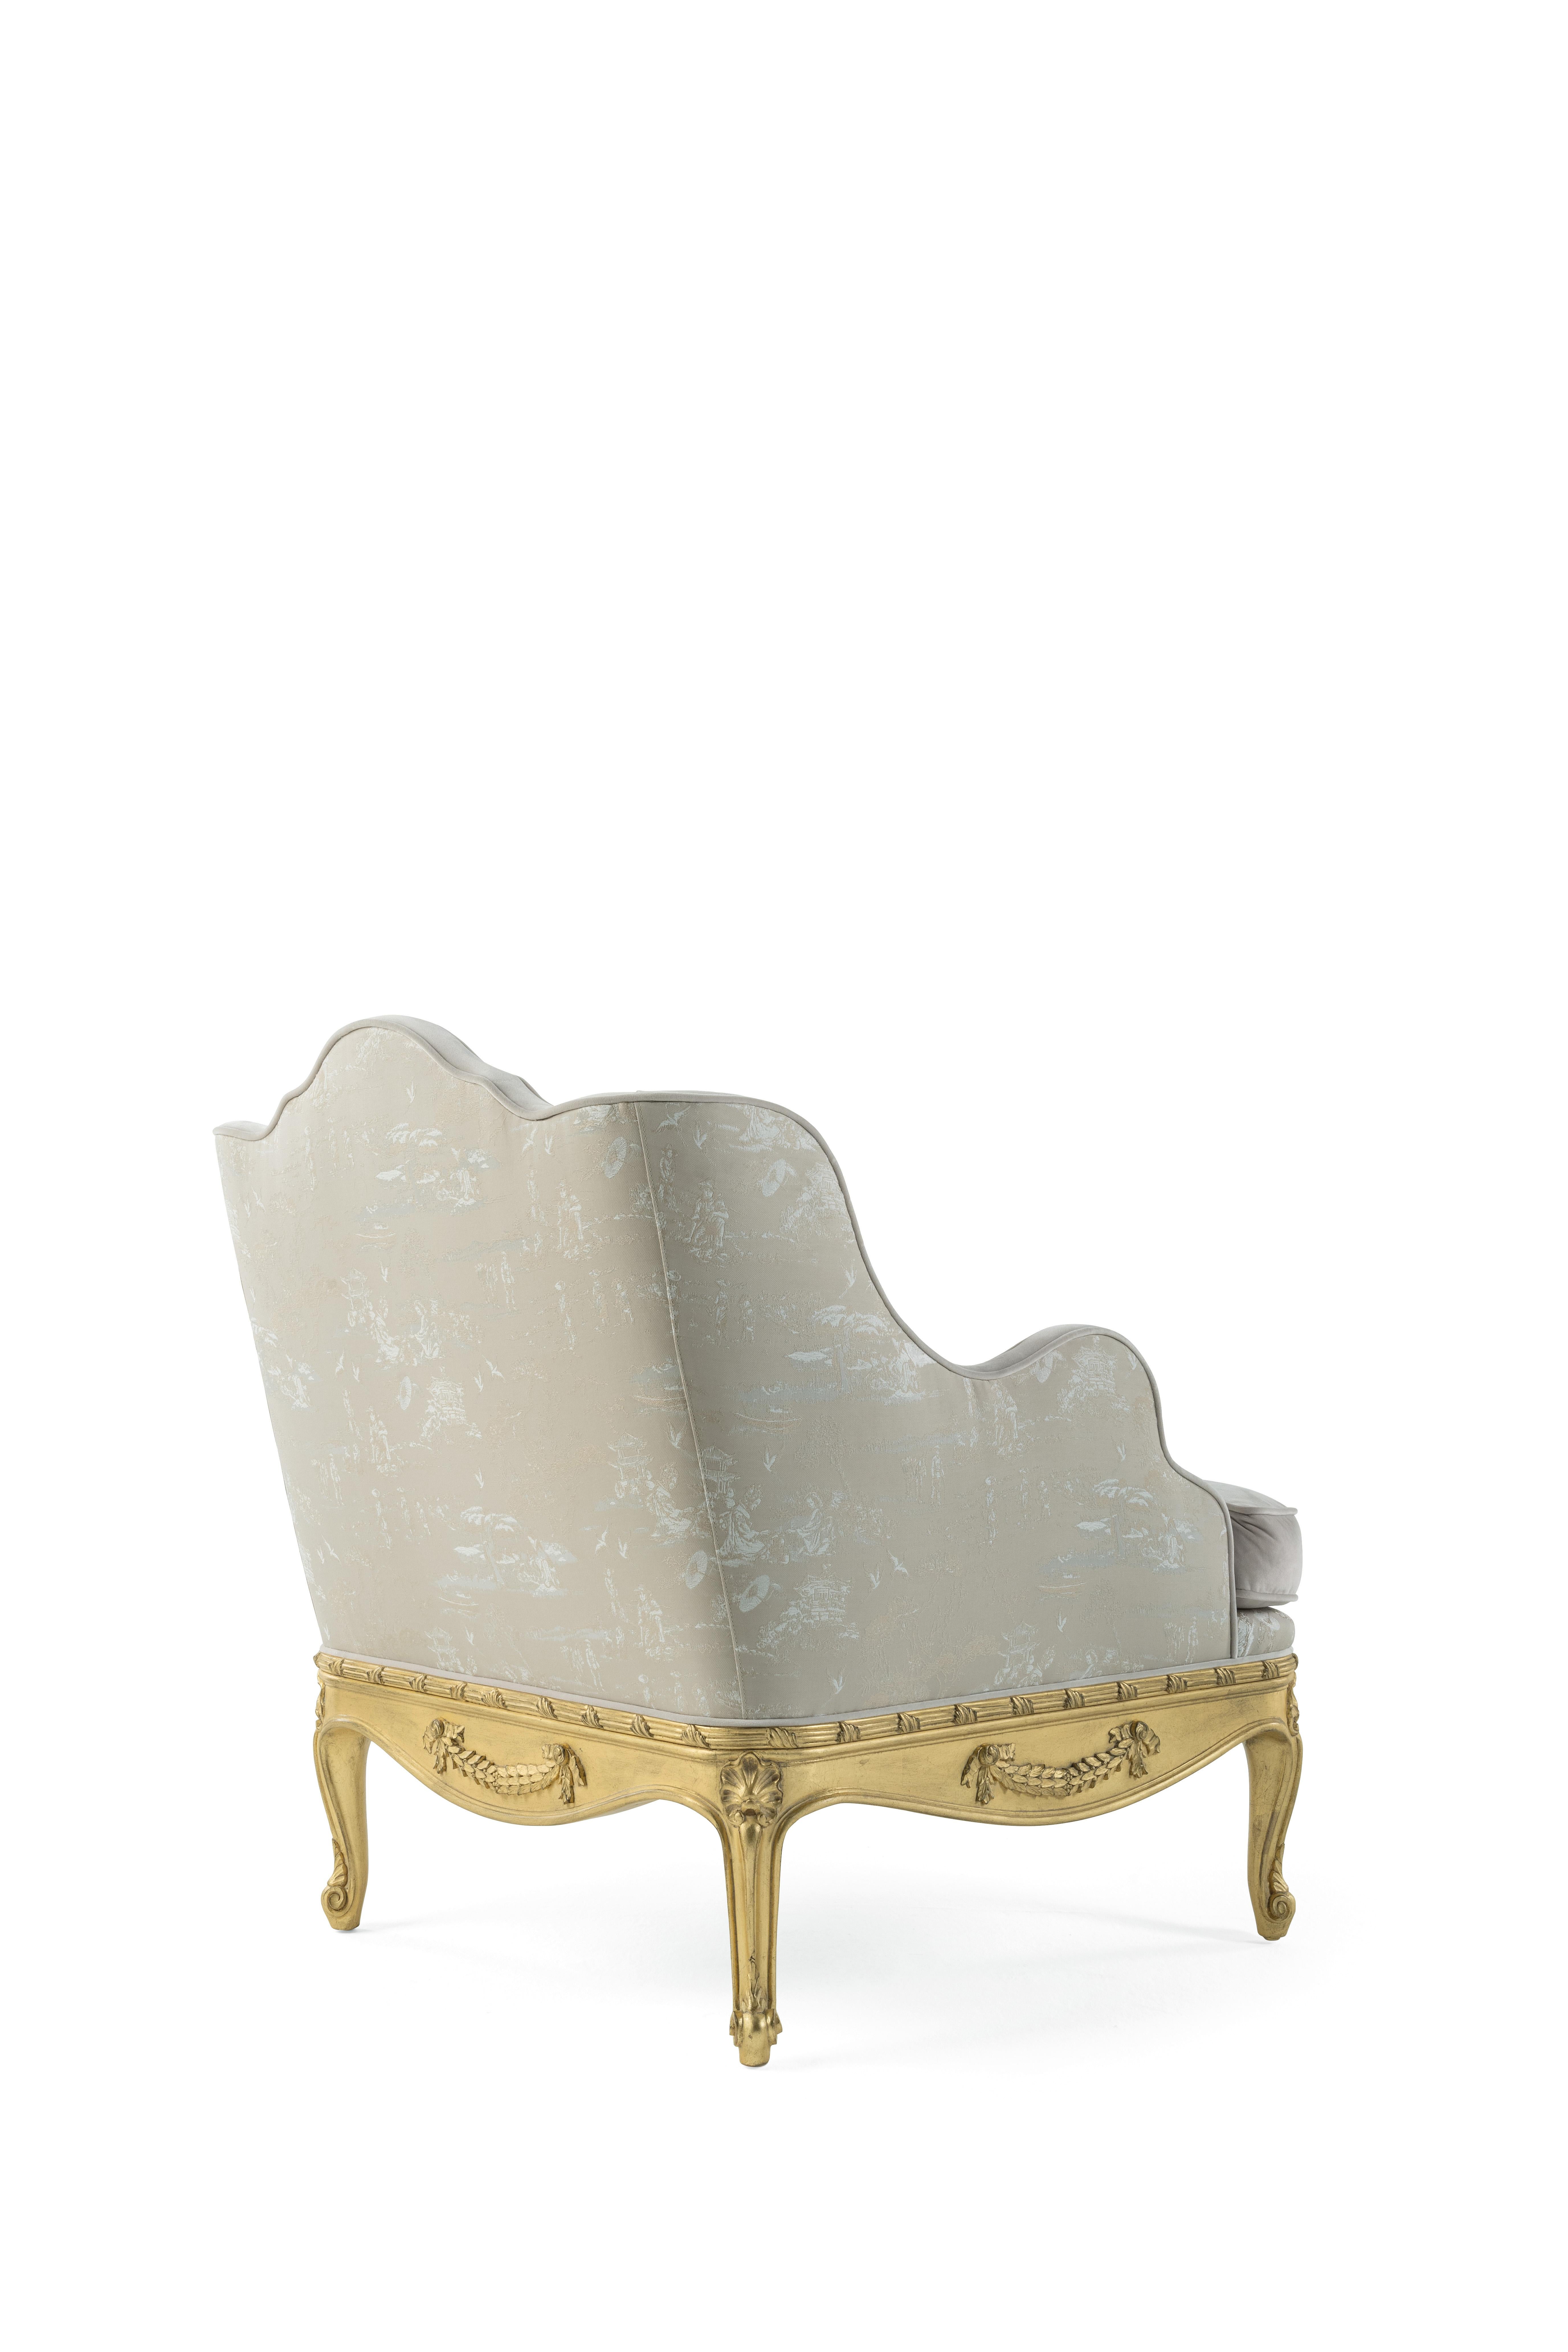 Italian 21st Century Verveine Armchair in Fabric with Gold Leaf Finishing For Sale